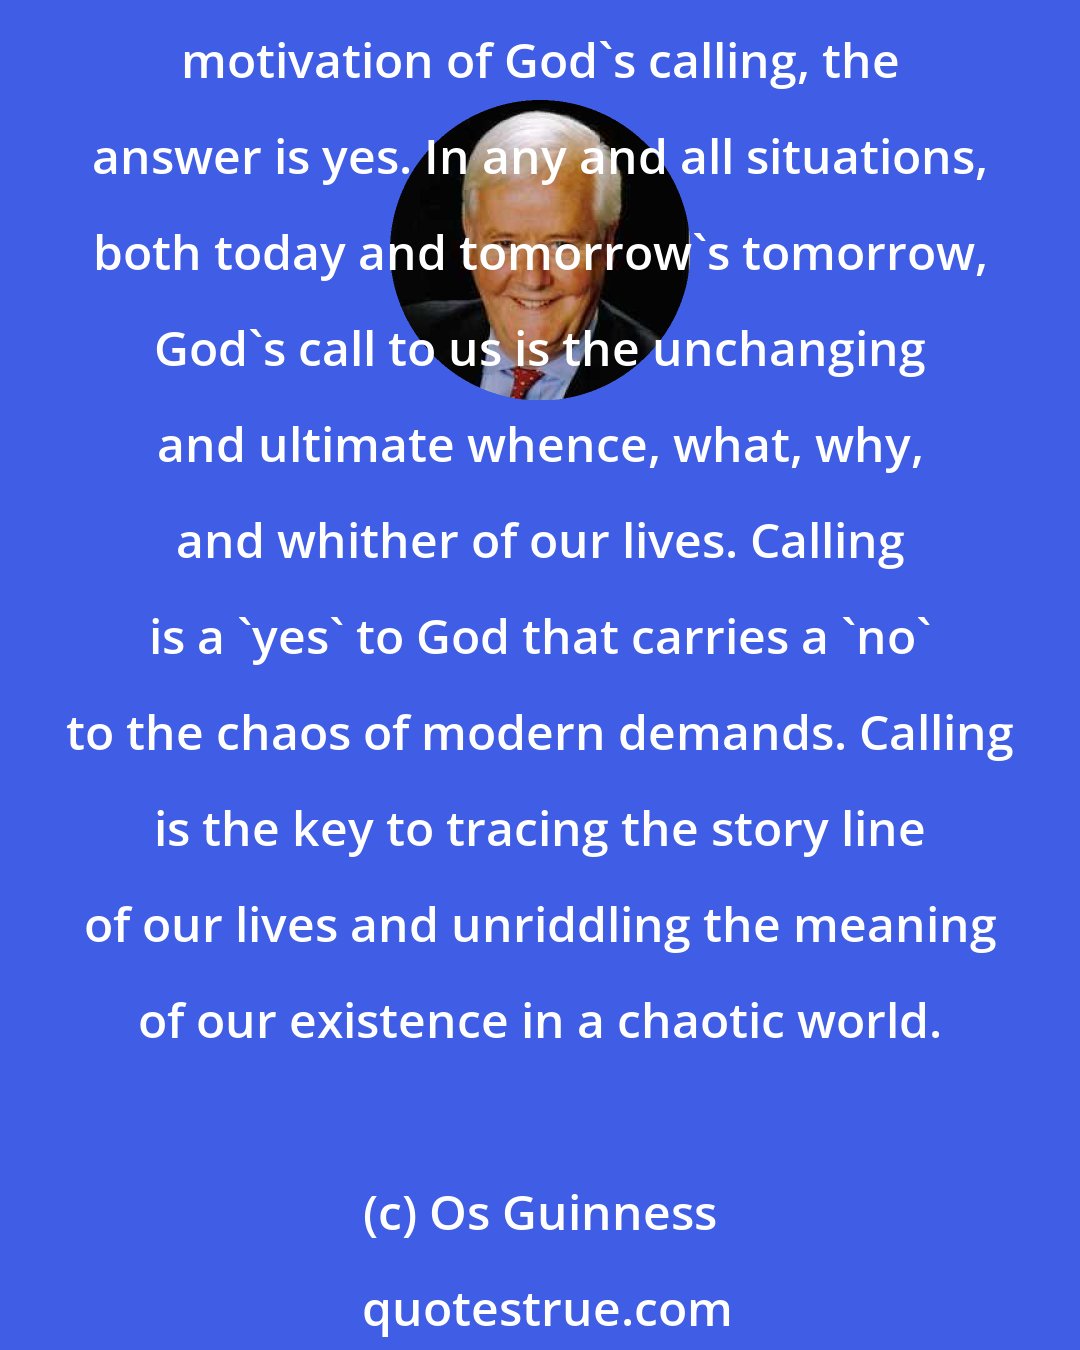 Os Guinness: We are not wise enough, pure enough, or strong enough to aim and sustain such a single motive over a lifetime. That way lies fanaticism or failure. But if the single motive is the master motivation of God's calling, the answer is yes. In any and all situations, both today and tomorrow's tomorrow, God's call to us is the unchanging and ultimate whence, what, why, and whither of our lives. Calling is a 'yes' to God that carries a 'no' to the chaos of modern demands. Calling is the key to tracing the story line of our lives and unriddling the meaning of our existence in a chaotic world.